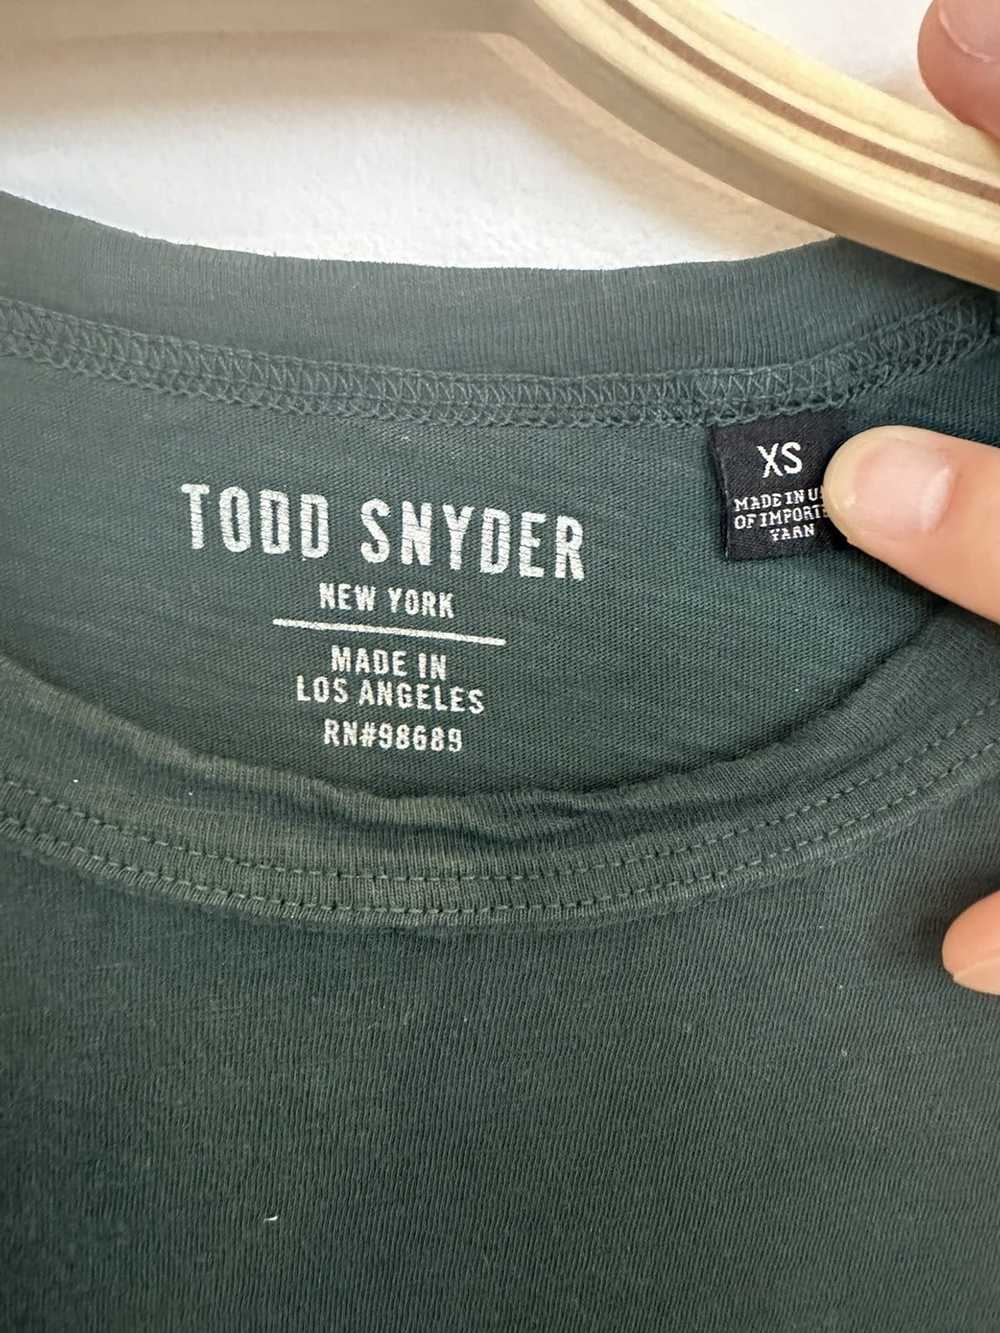 Todd Snyder Made In LA Long-Sleeve Tee - image 3